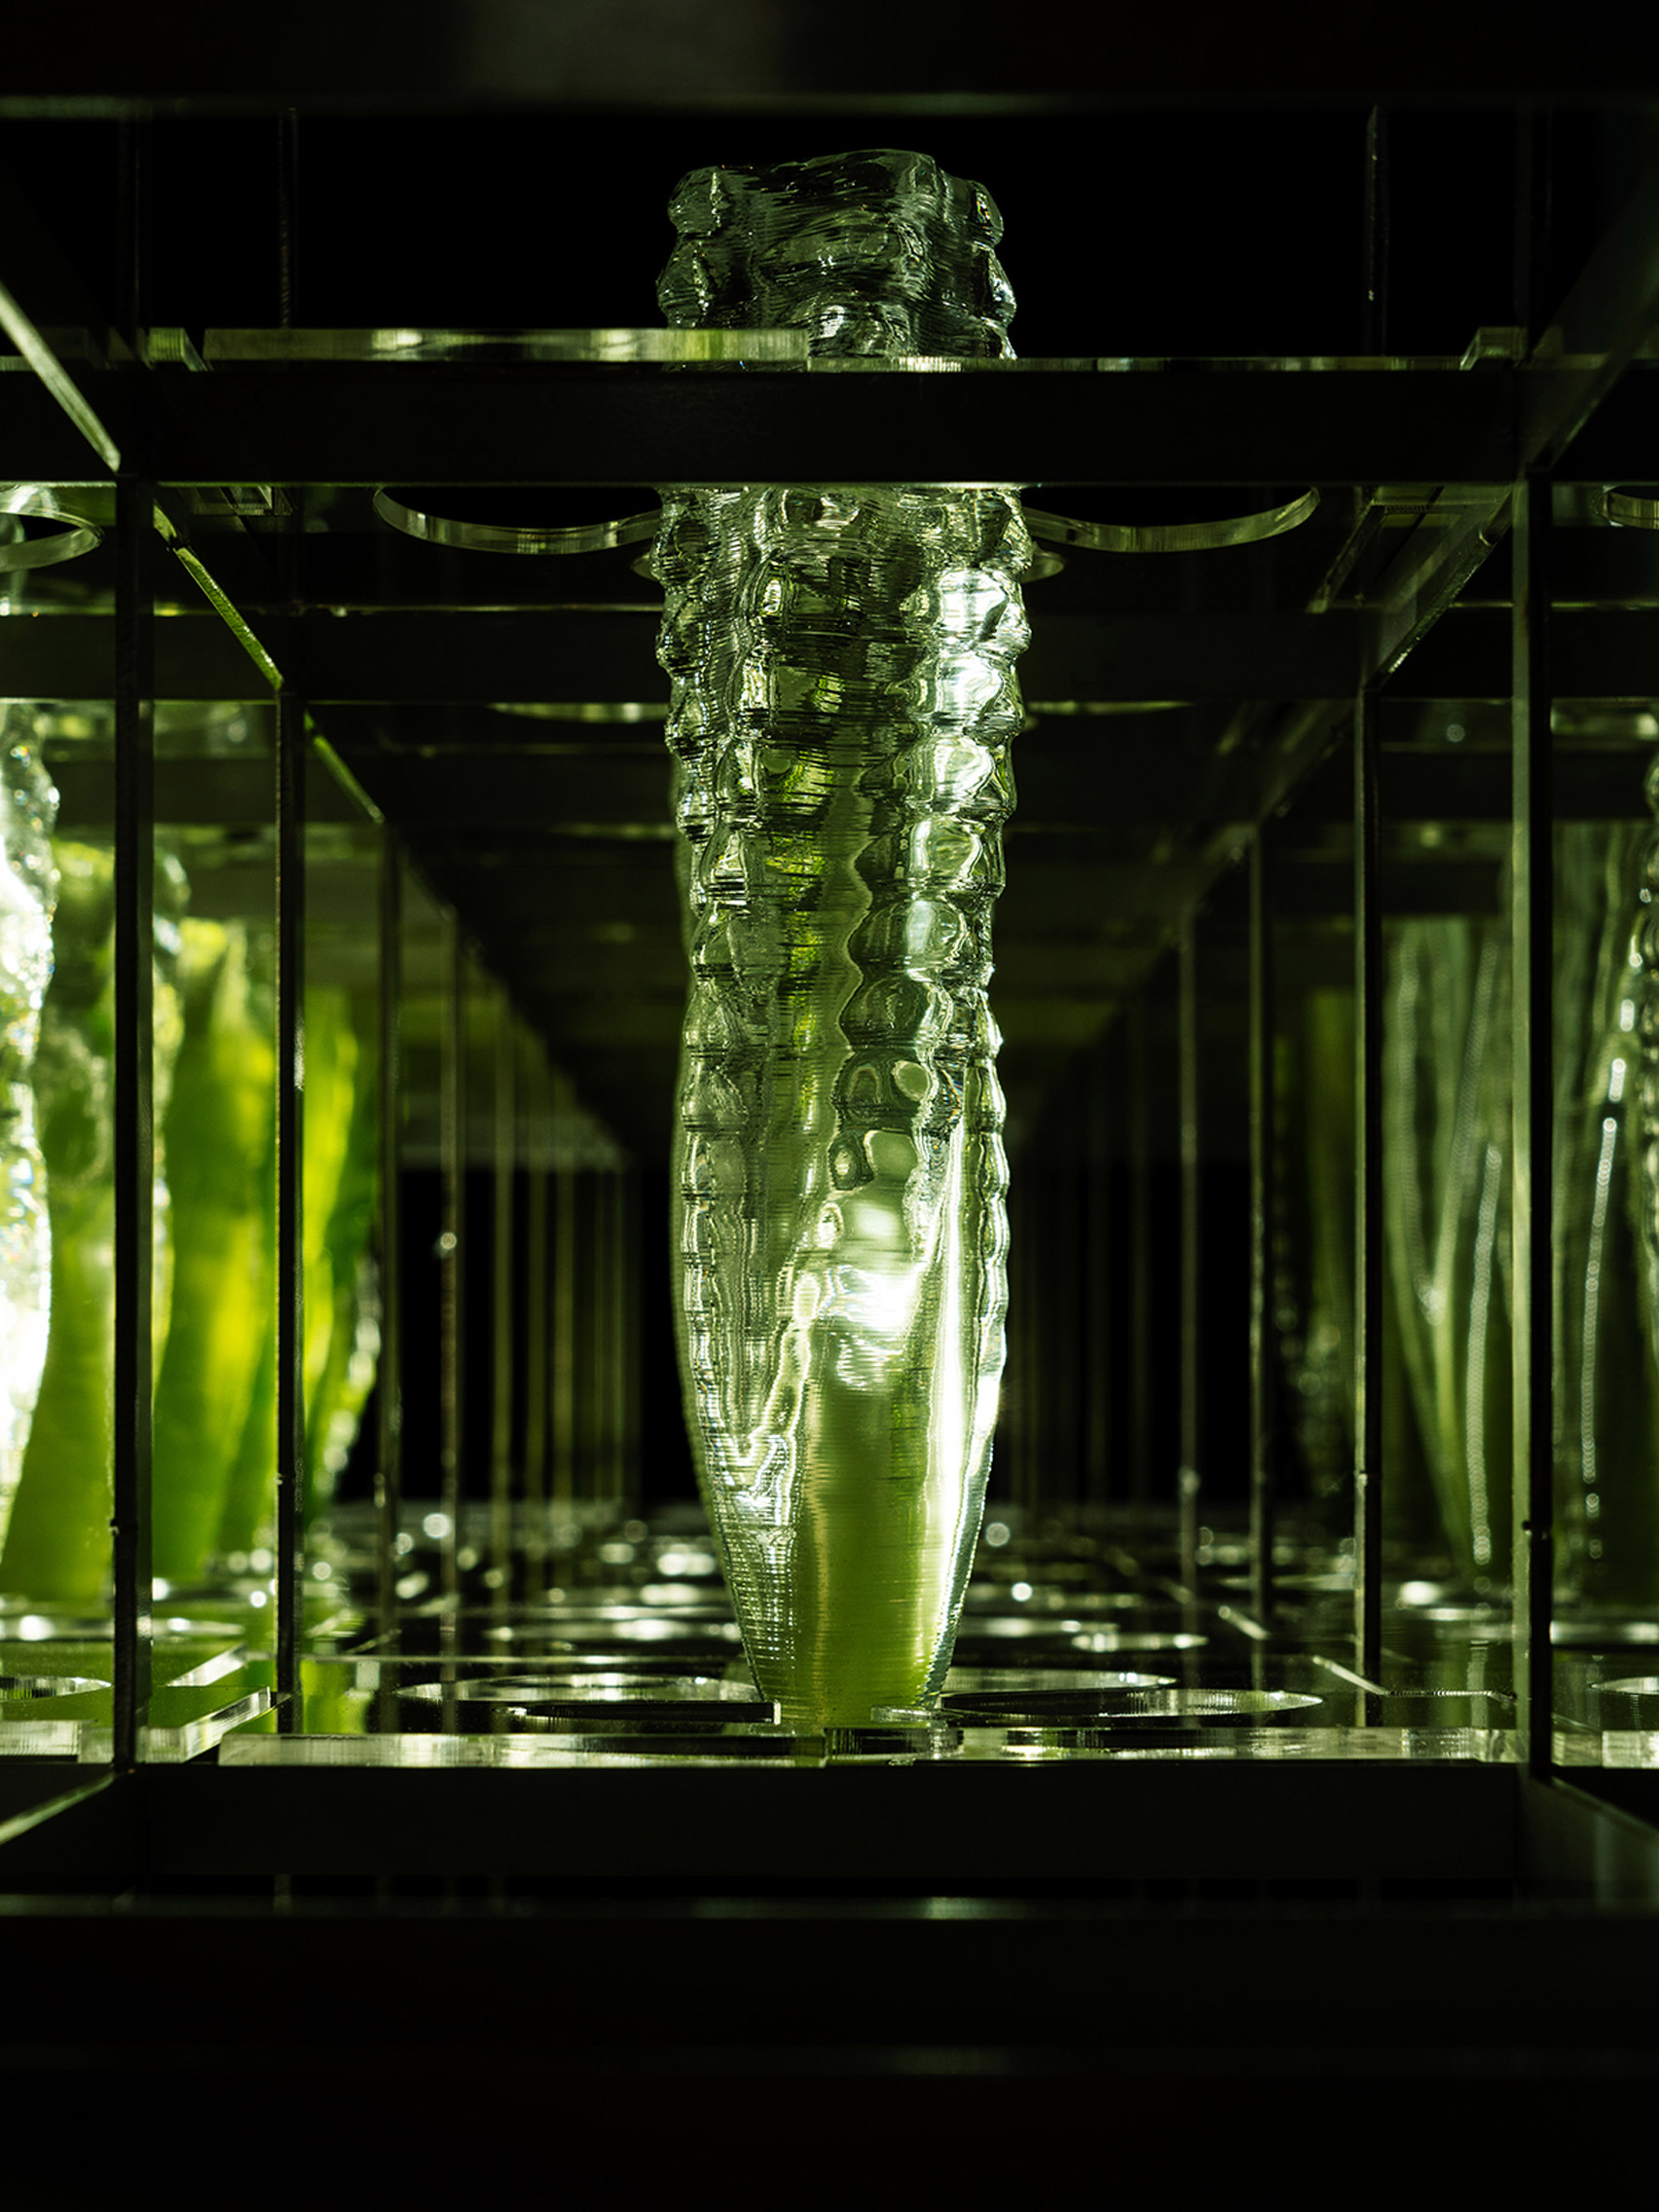 3D-printed glasses containing drinkable algae